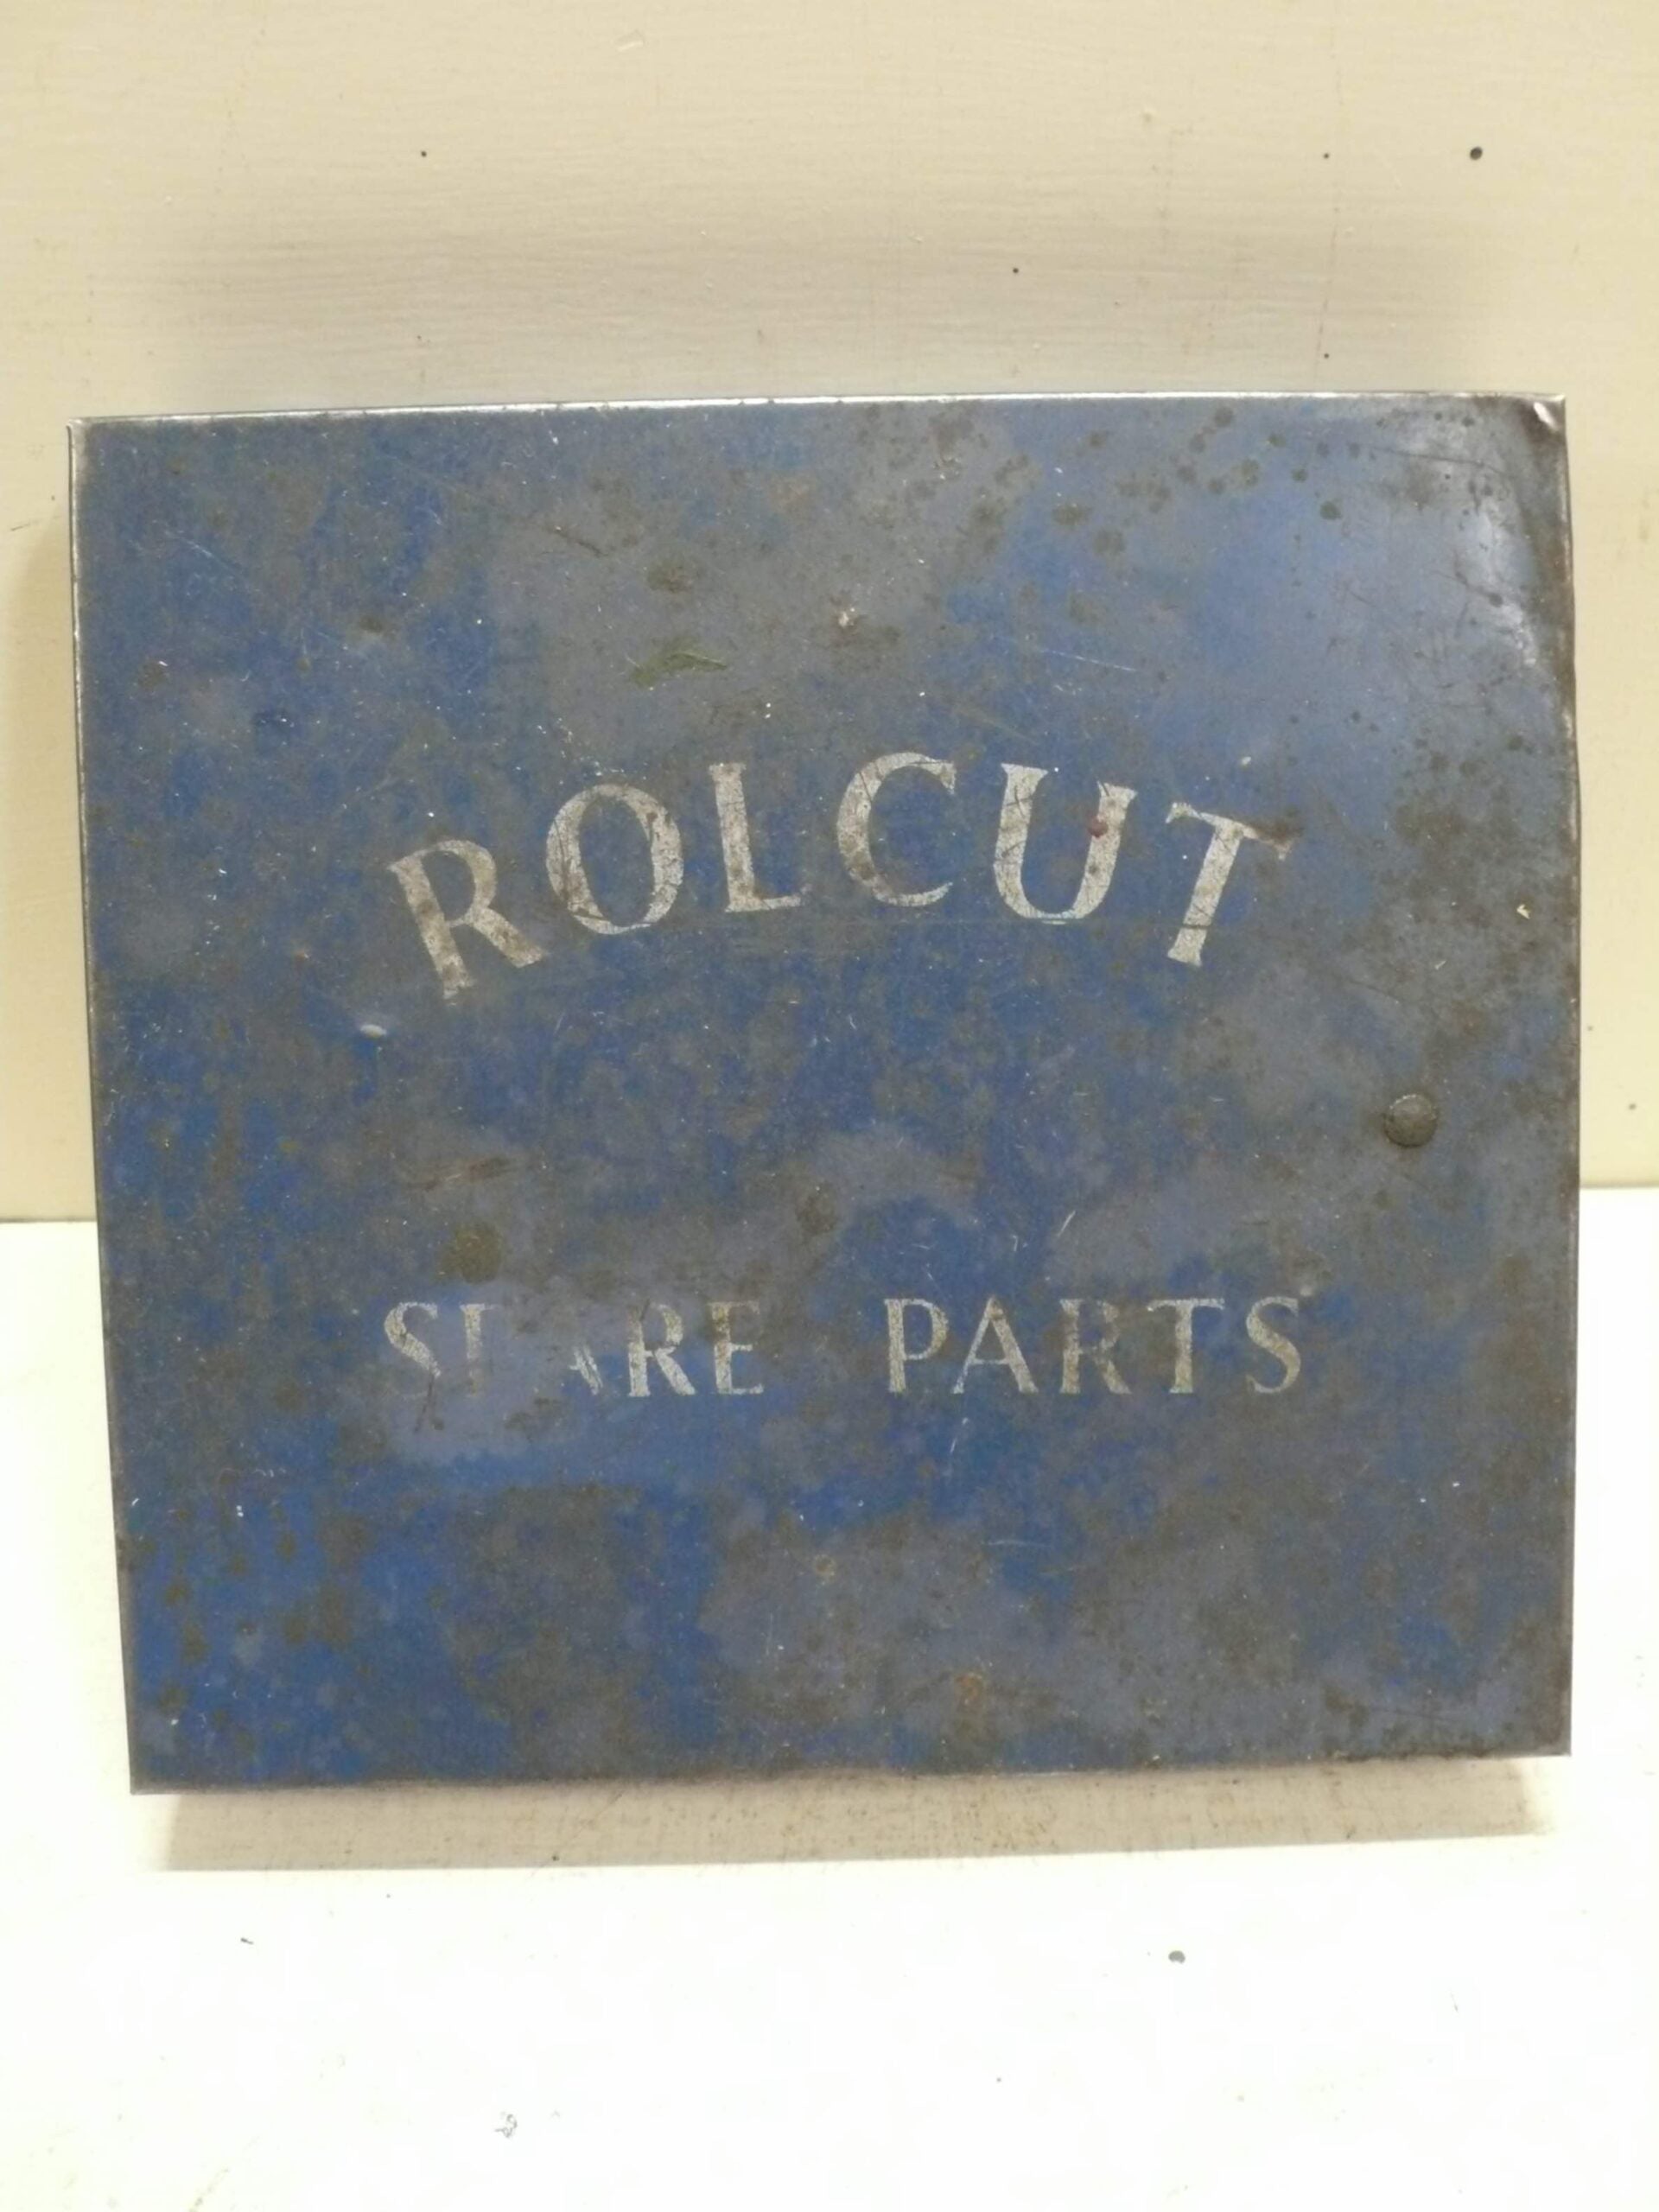 Tin of Rolcut Spare Parts